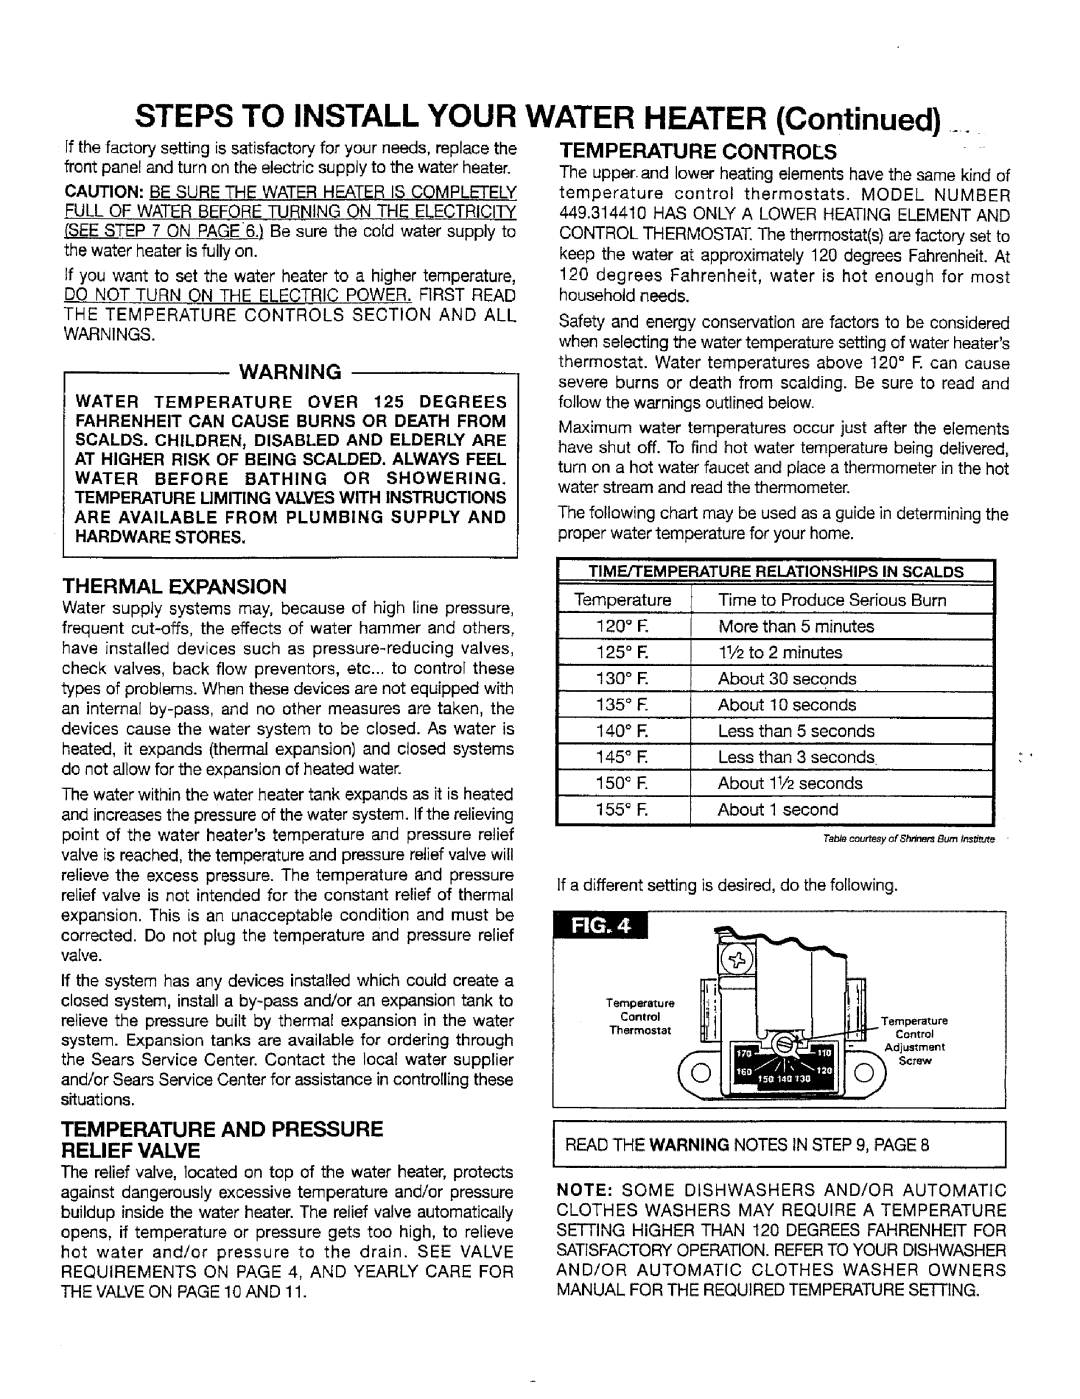 Sears 449.310531, 449.320411, 449.320511 Thermal Expansion, Temperature Controls, Temperature And Pressure, Relief Valve 